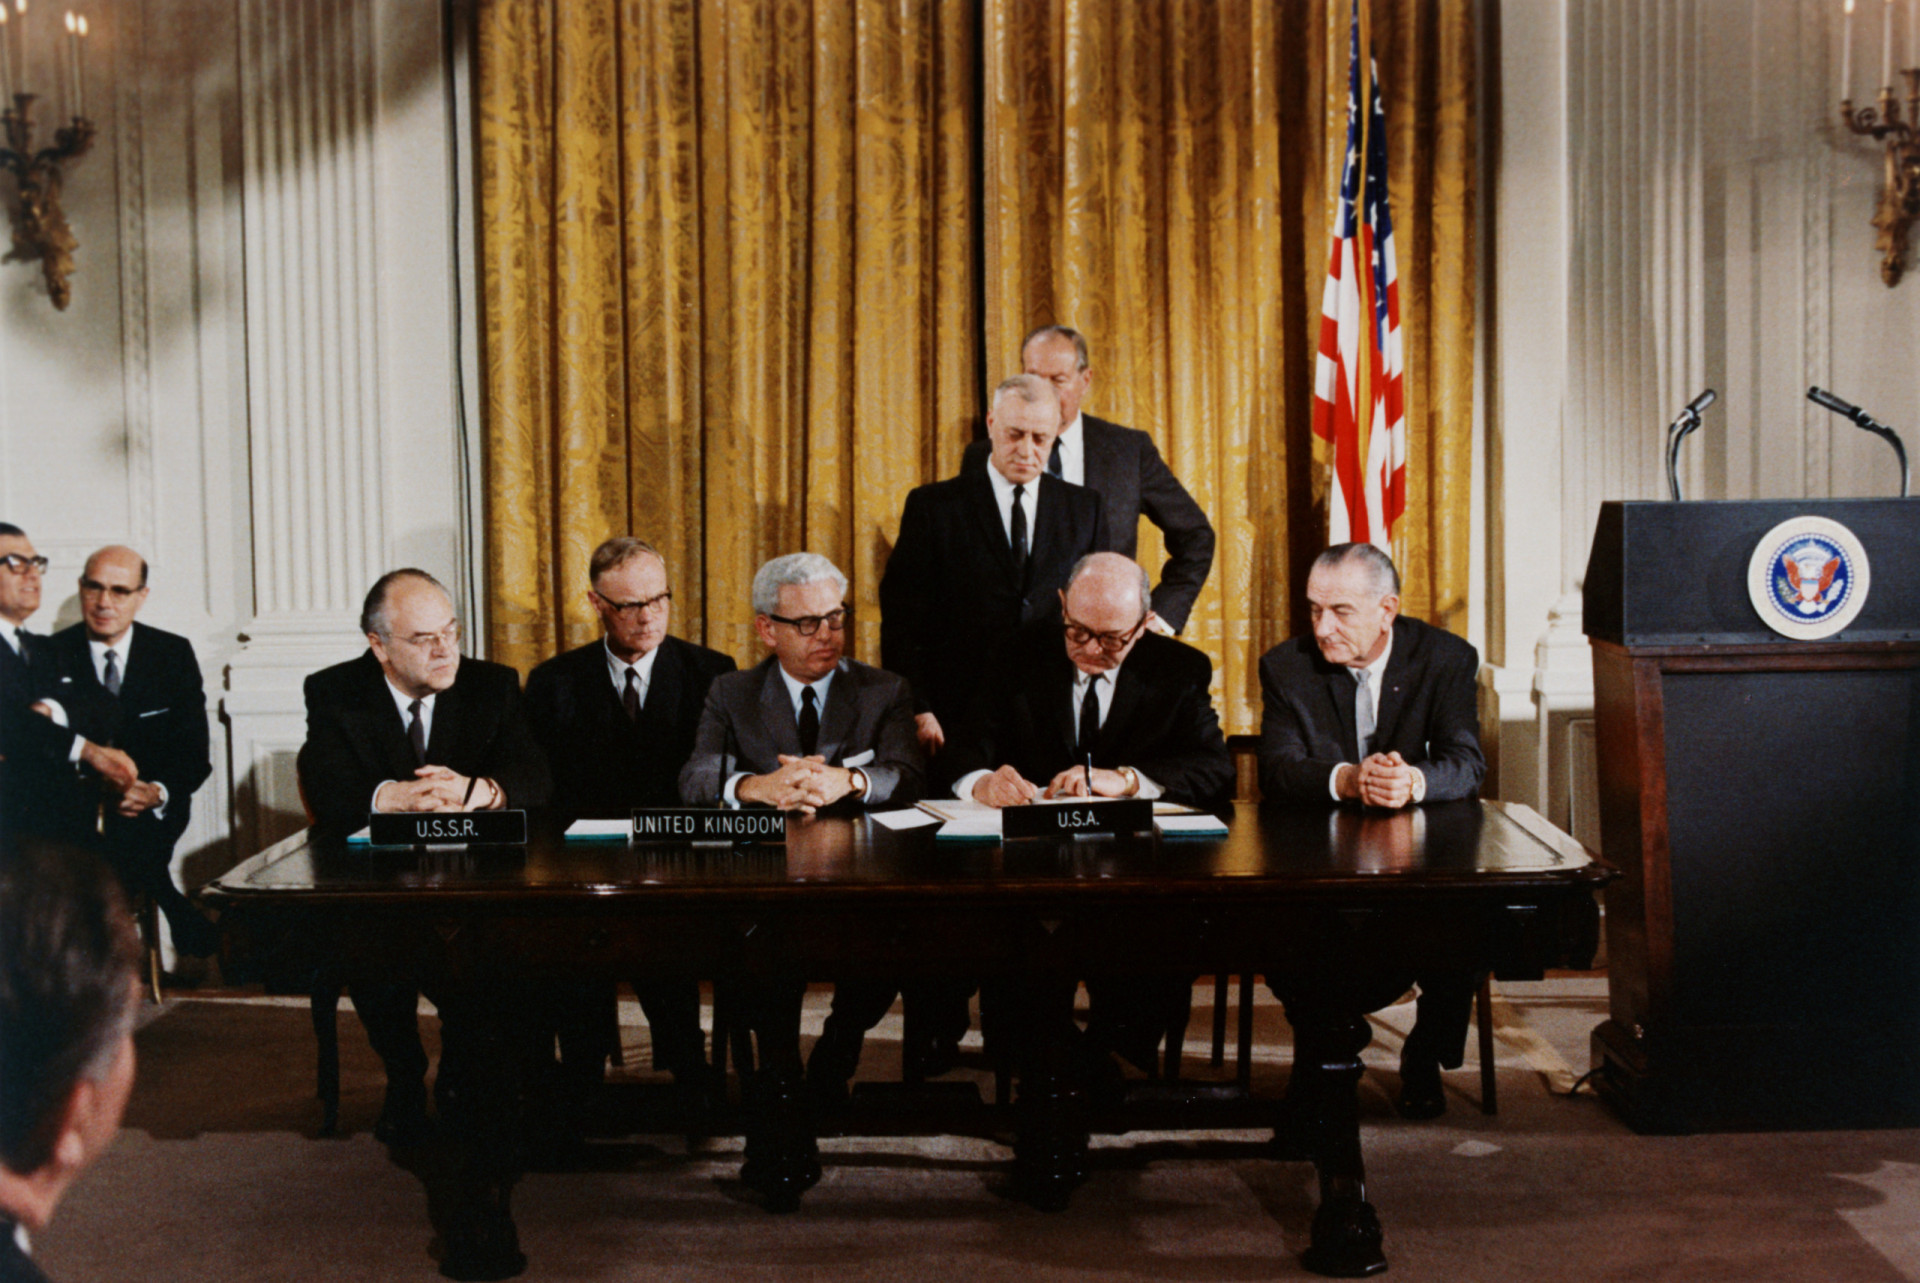 <p>The 1967 Outer Space Treaty, originally between the US, UK, and the Soviets, put an end to any future plans of a similar kind. </p><p>You may also like:<a href="https://www.starsinsider.com/n/500119?utm_source=msn.com&utm_medium=display&utm_campaign=referral_description&utm_content=713901en-ph"> Bizarre obsessions of infamous dictators </a></p>